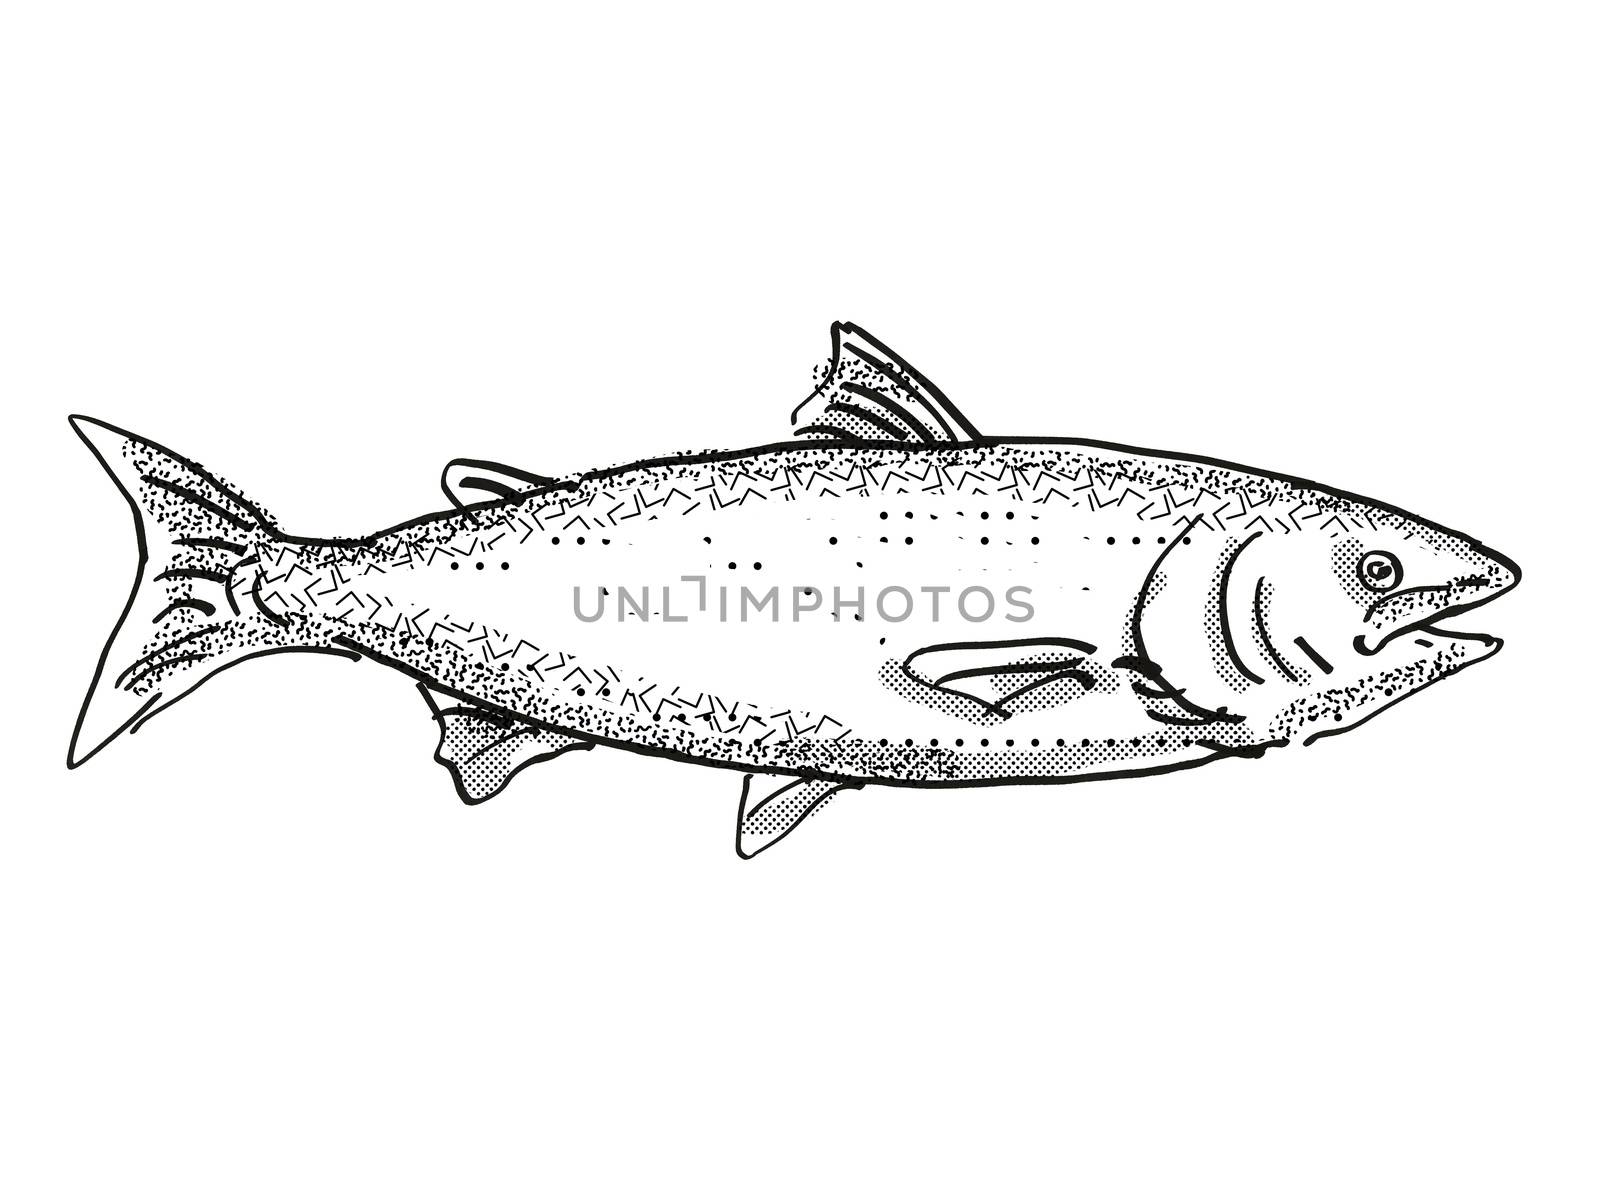 Retro cartoon style drawing of a king salmon , a native New Zealand marine life species viewed from side on isolated white background done in black and white